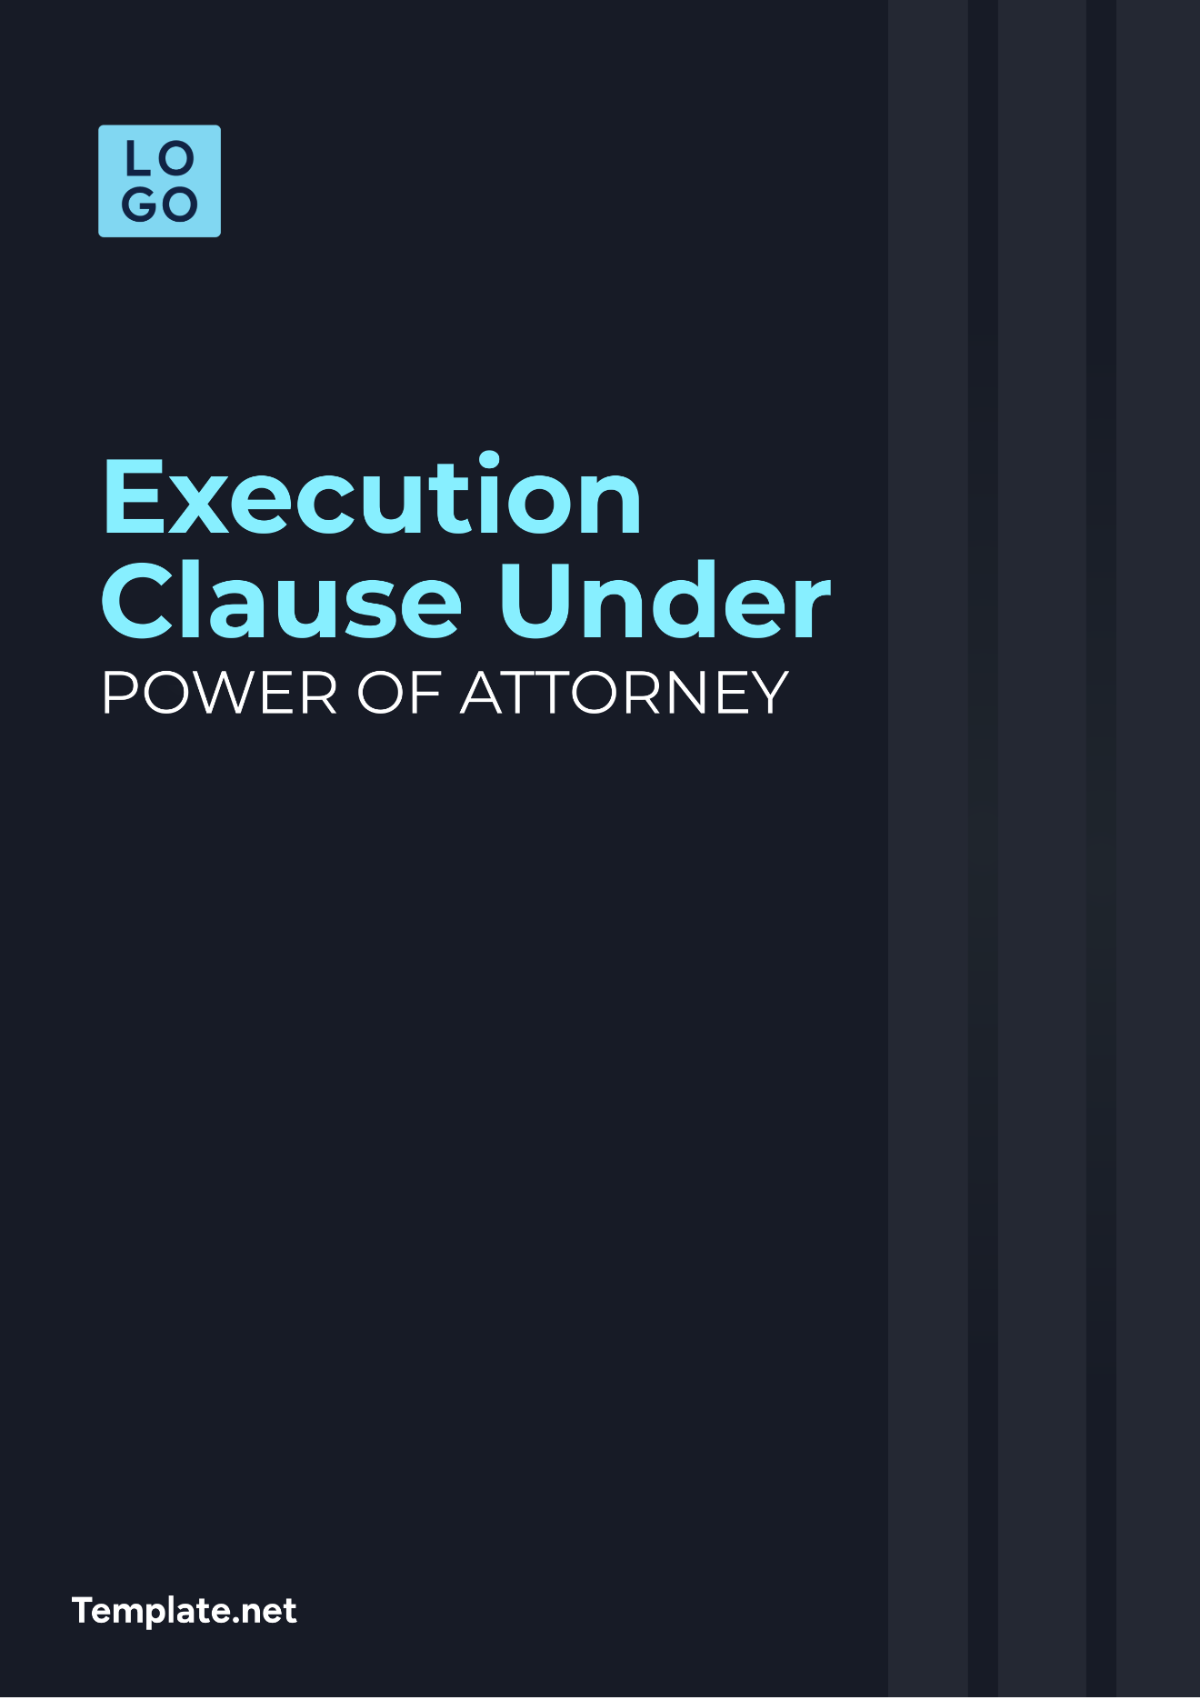 Execution Clause Under Power of Attorney Template